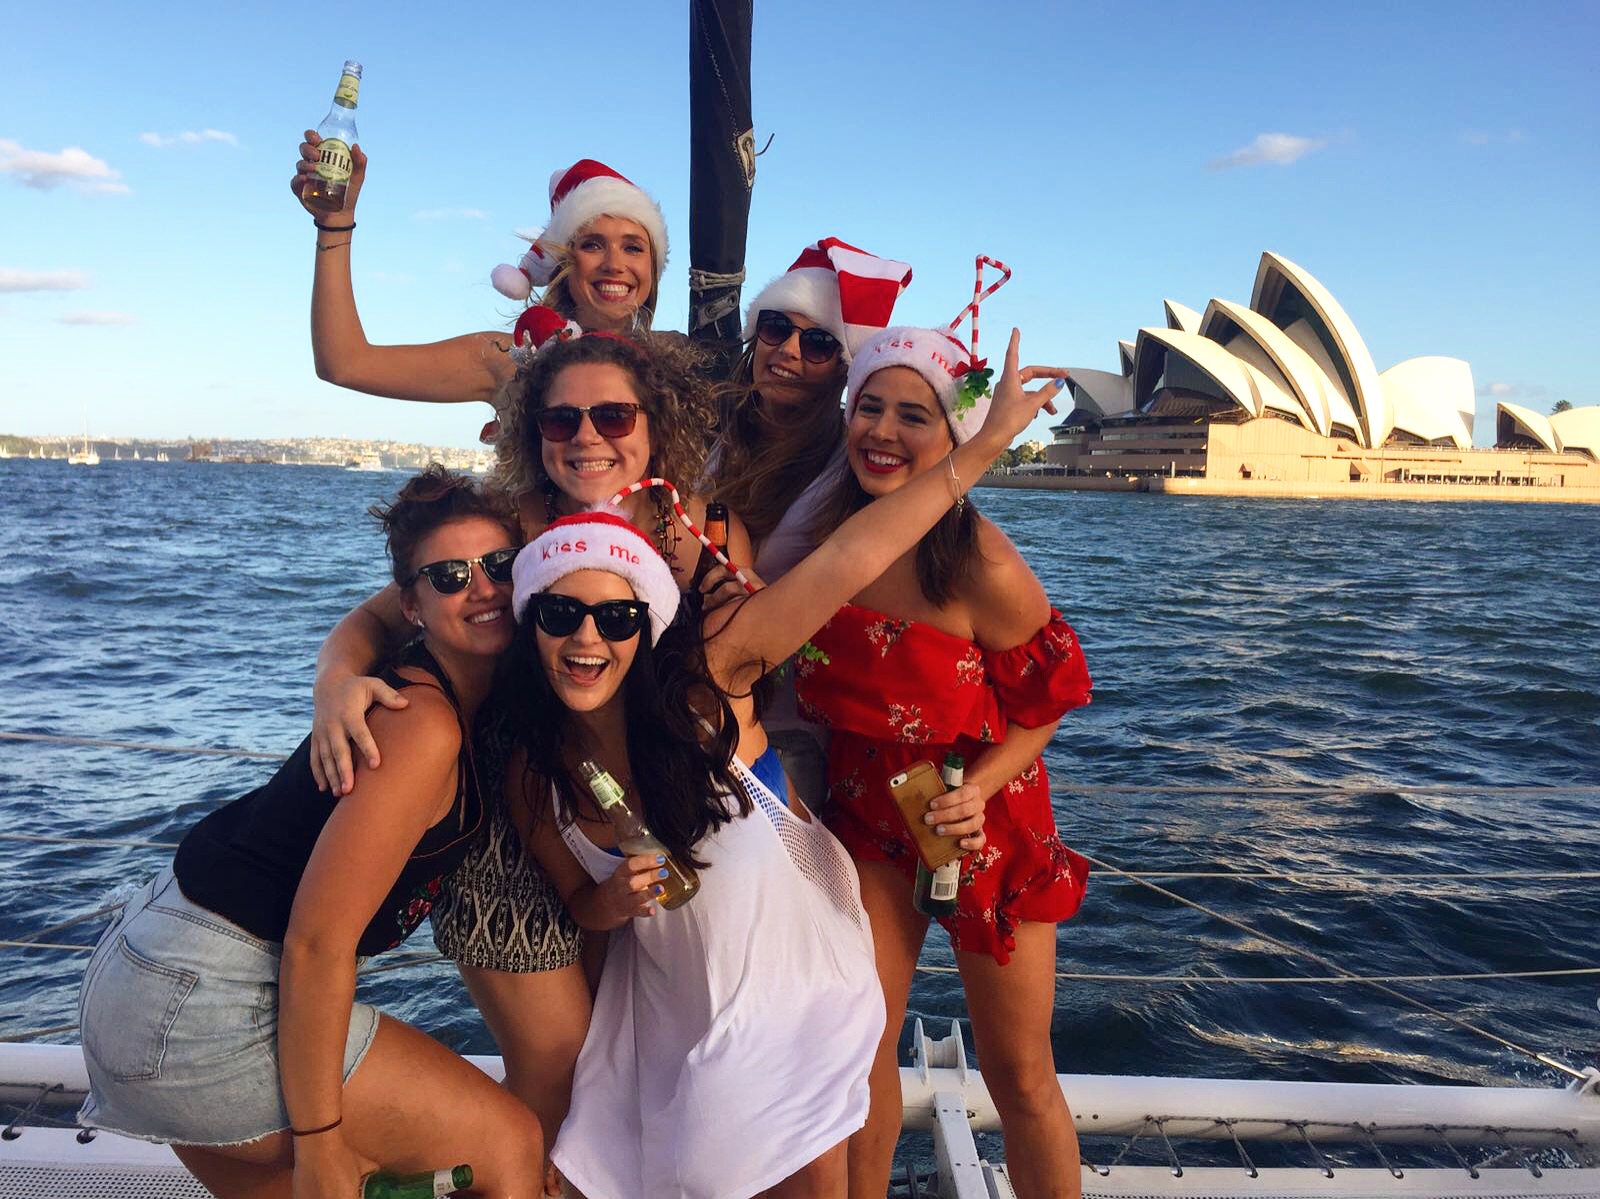 Rockfish Sydney Harbour Christmas Party Cruise 15 pp p/h